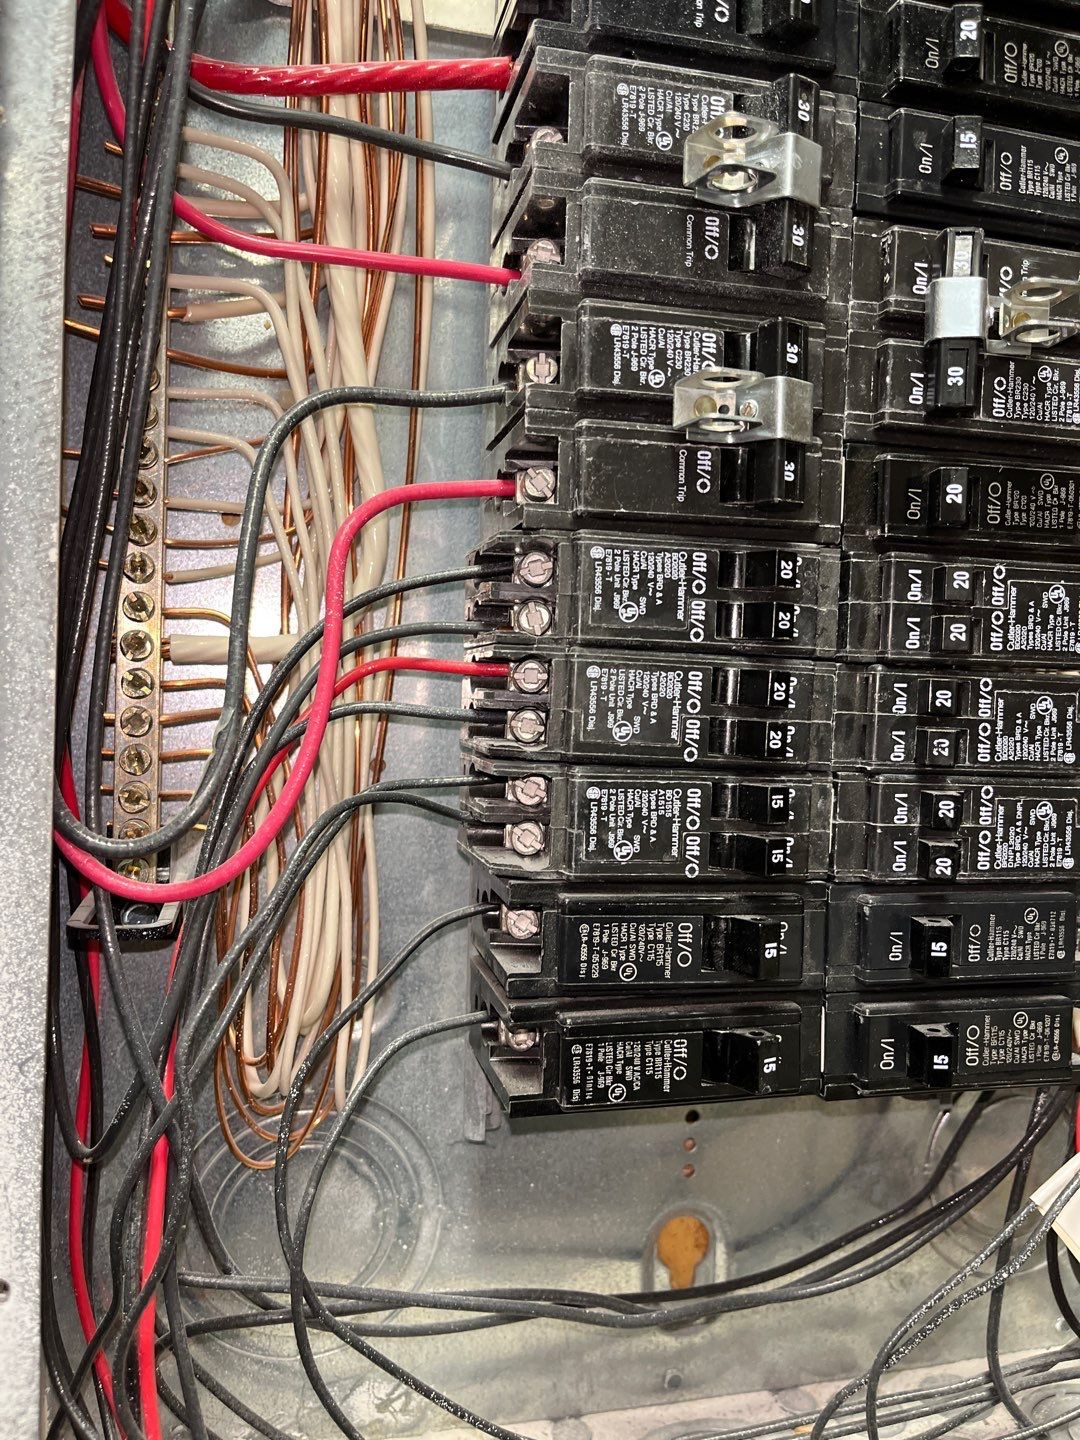 meter-box-breaker-panel-and-rewiring-project-in-lees-summit-mo v2